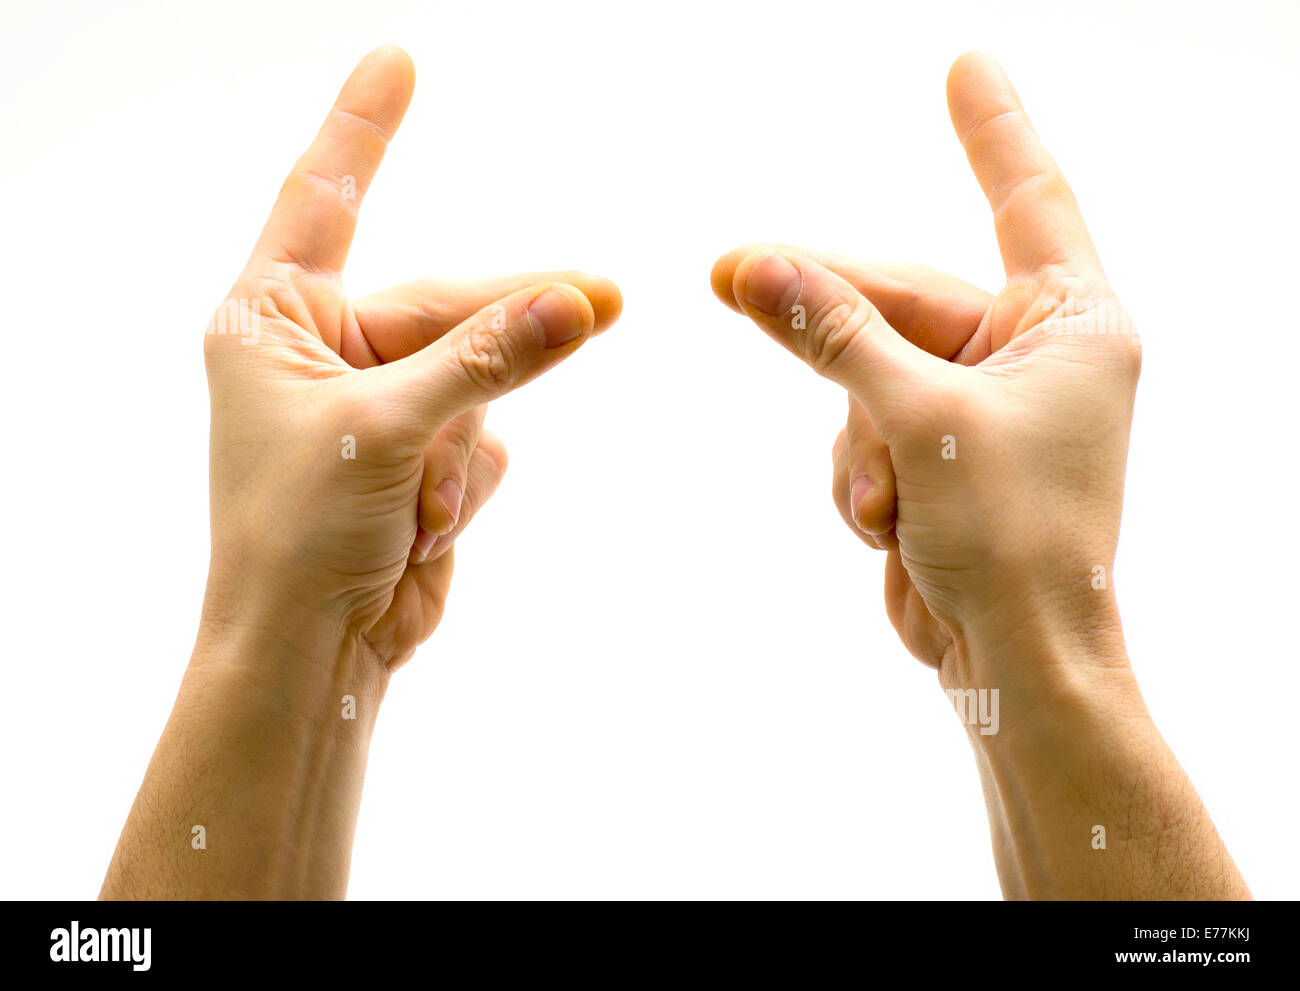 Snapping both fingers. Stock Photo